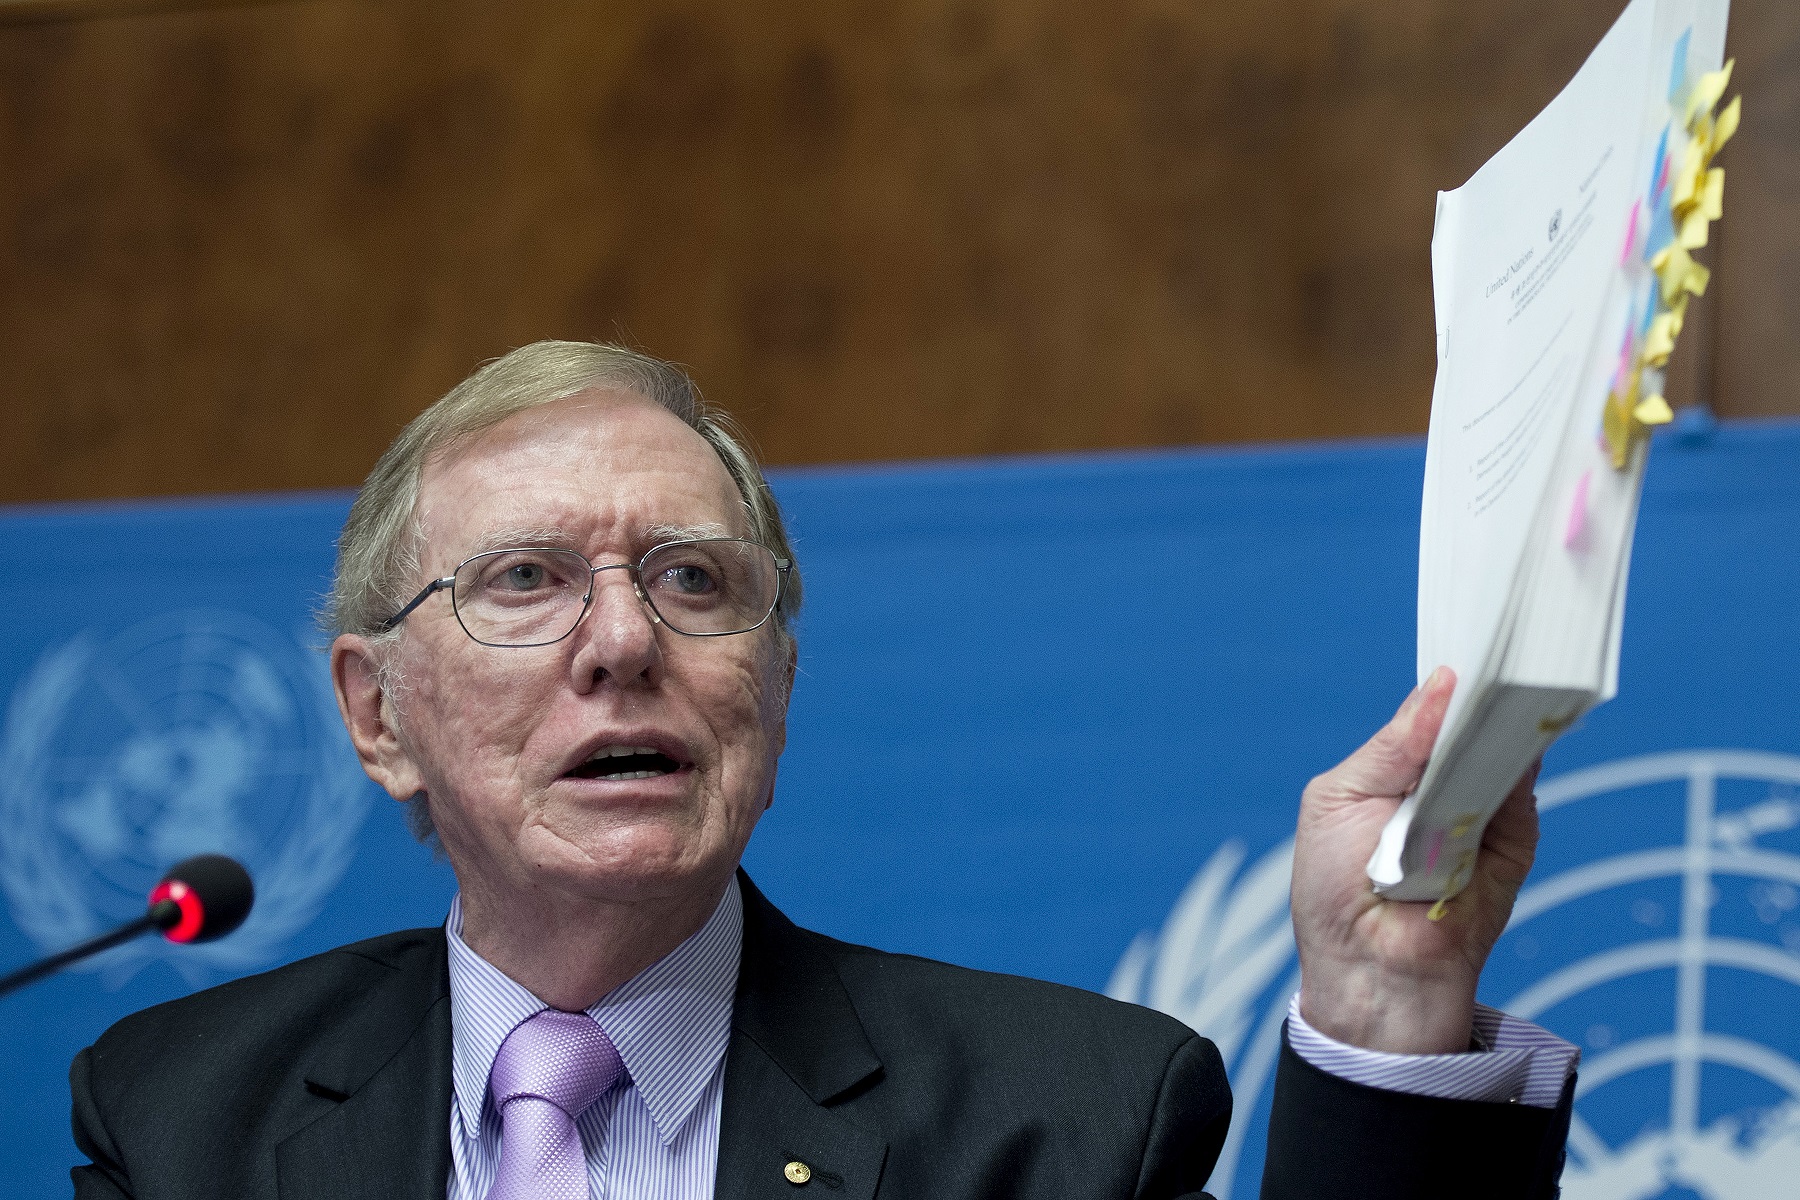 Michael Kirby - Chair of the Commission of Inquiry on Human Rights in the Democratic People's Republic of Korea during Launch of the report of the Commission of Inquiry on Human Rights in the Democratic People's Republic of Korea. Photo: UN Photo/Jean-Marc Ferré.